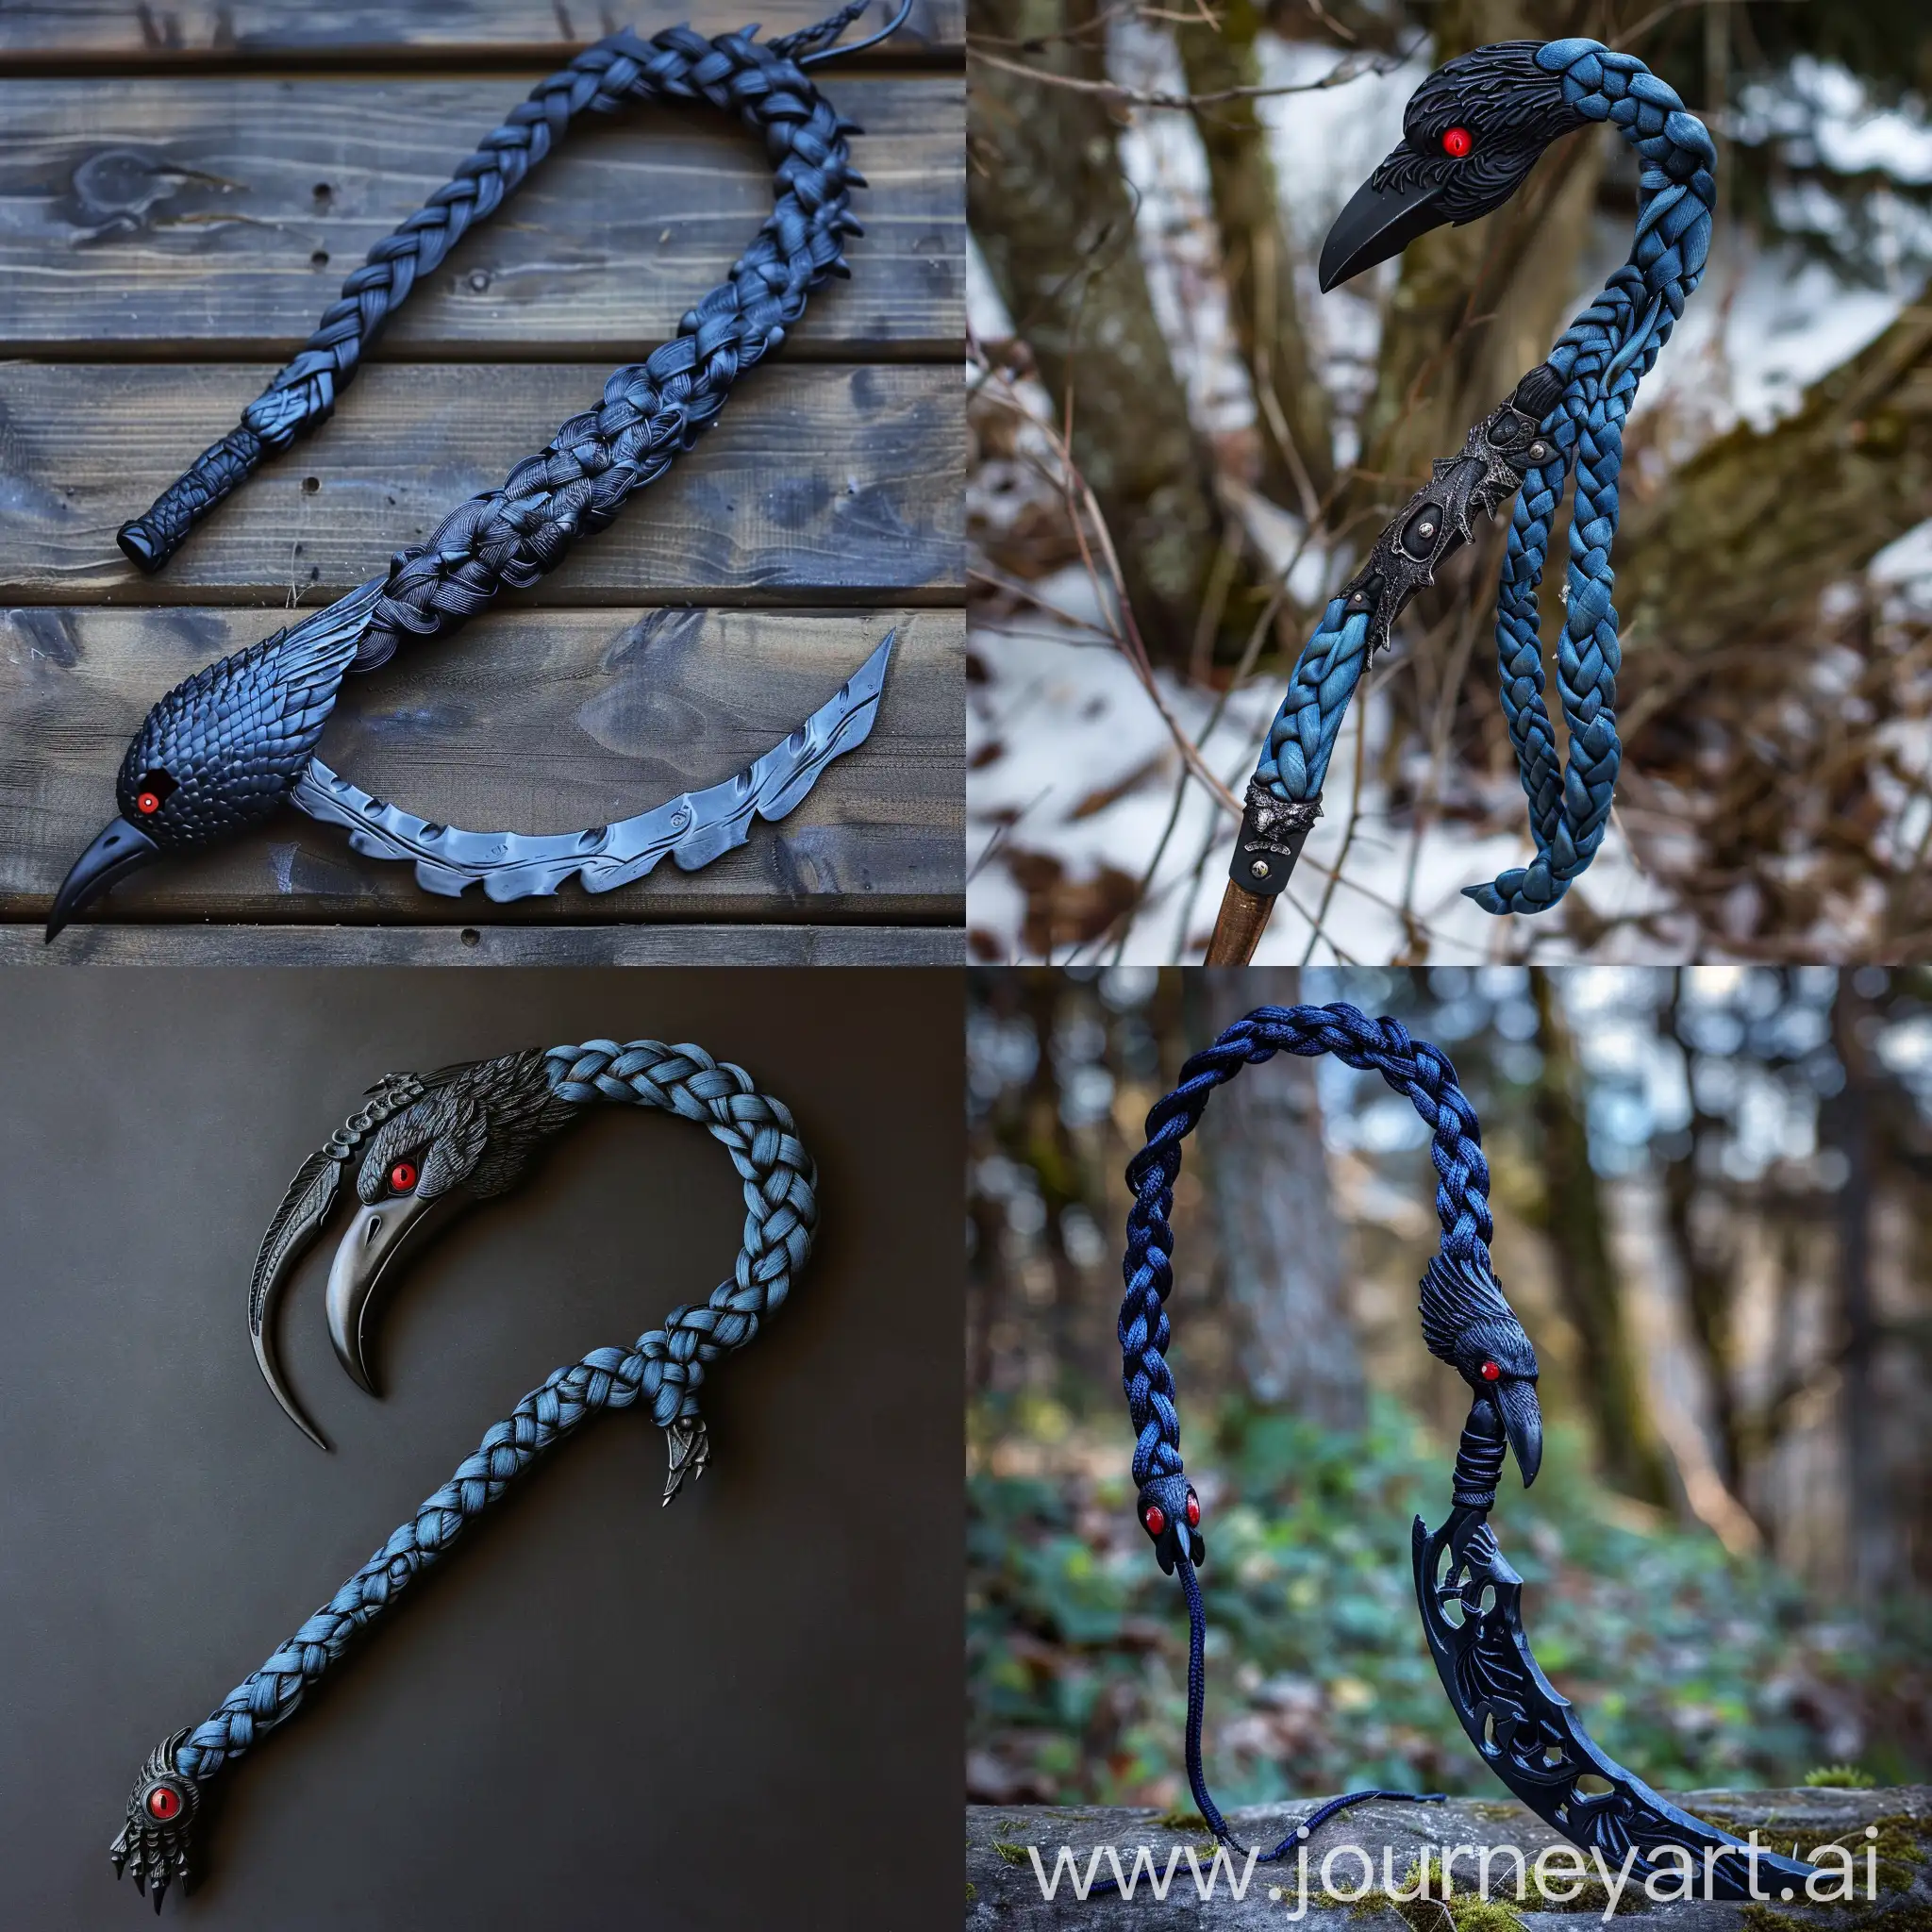 A blued braid. A scythe Whose blade looks like a raven's head in black, the handle is made in the style of a raven's foot. It has red eyes as an ornament.